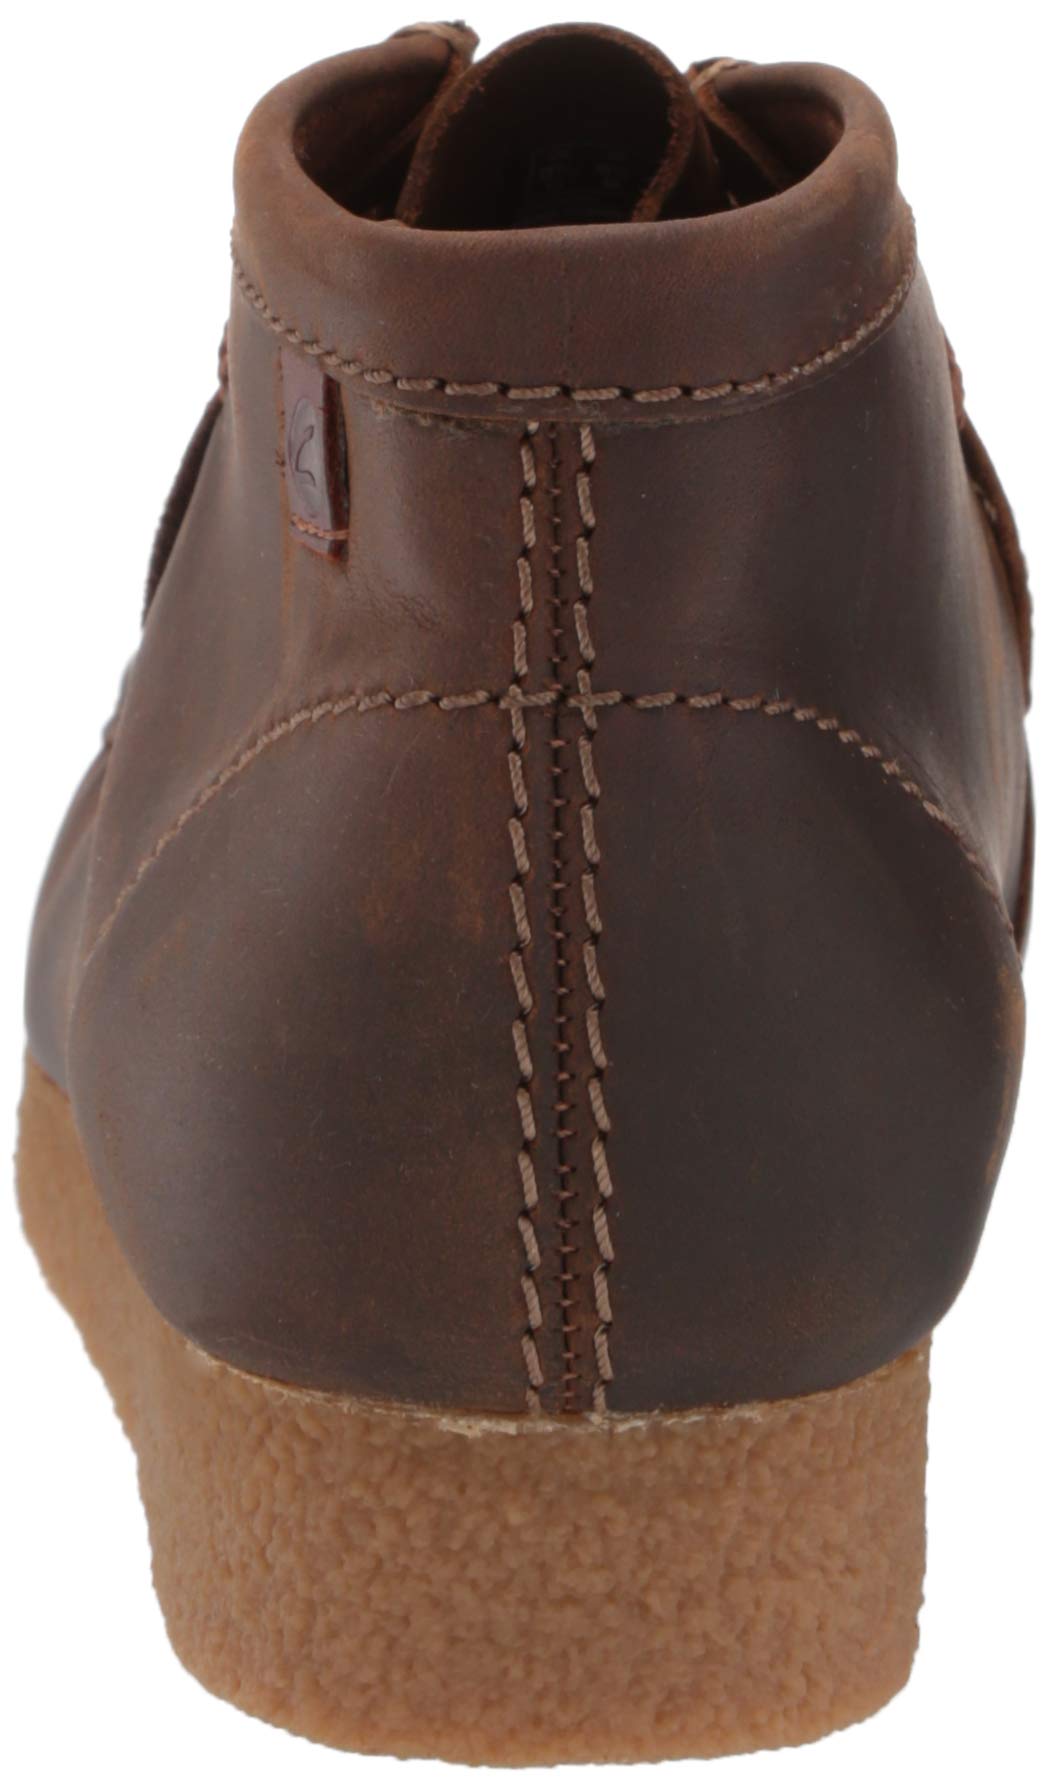 Clarks Men's Shacre Boot Ankle, Beeswax Leather, 8.5 